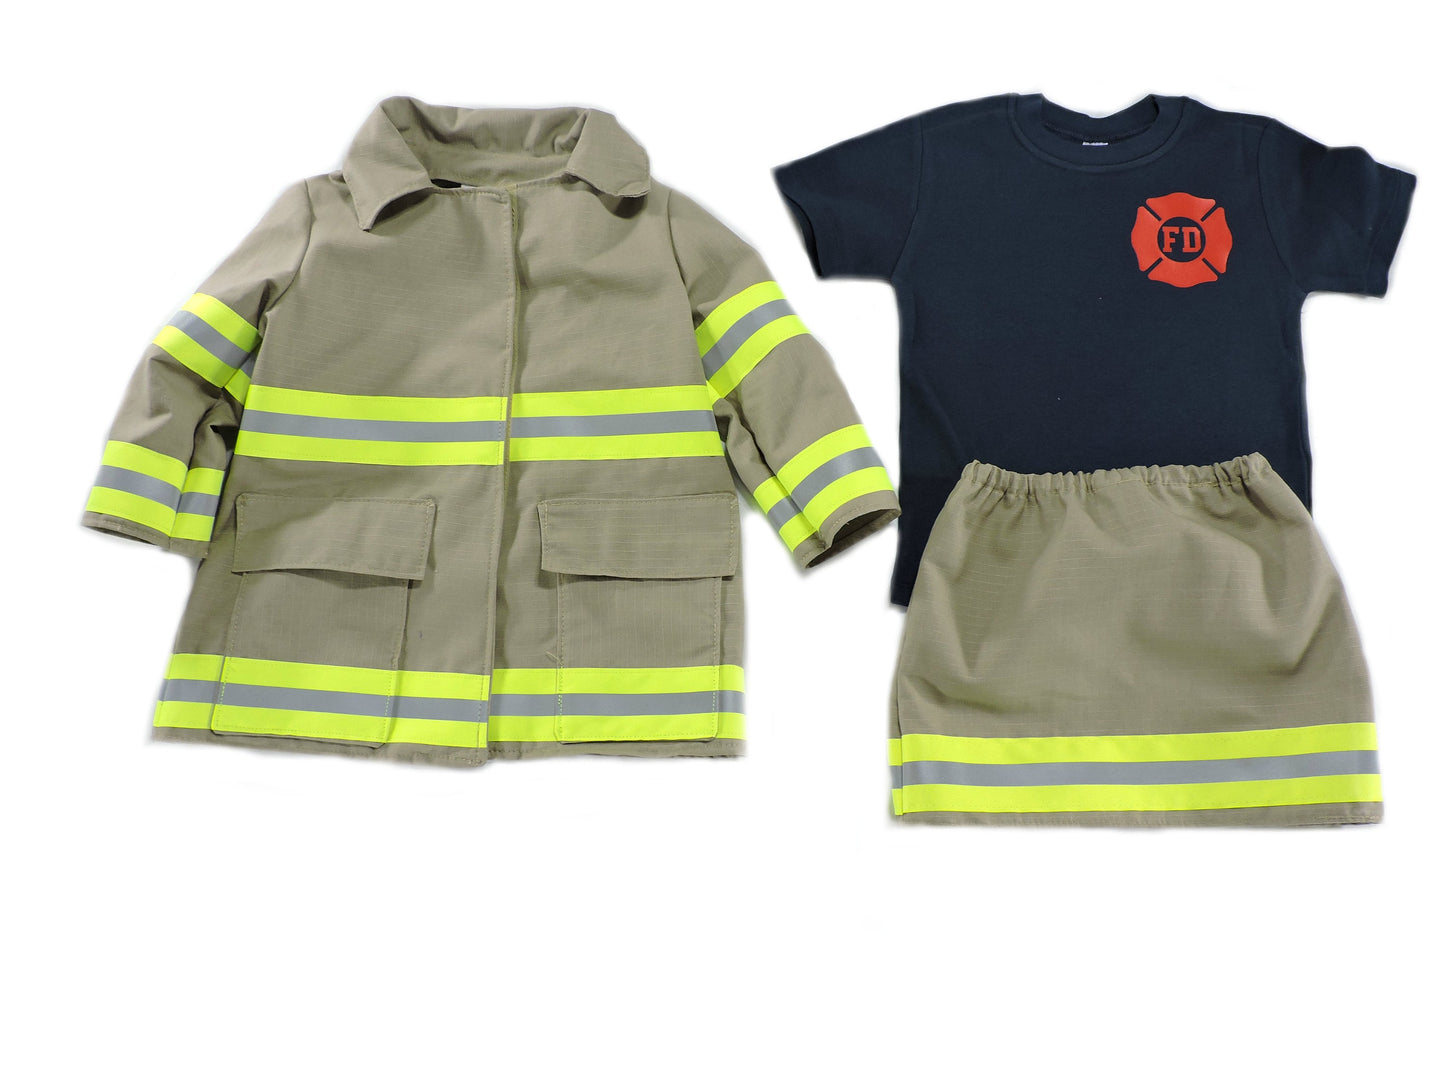 Tan fabric Firefighter toddler girl outfit and jacket